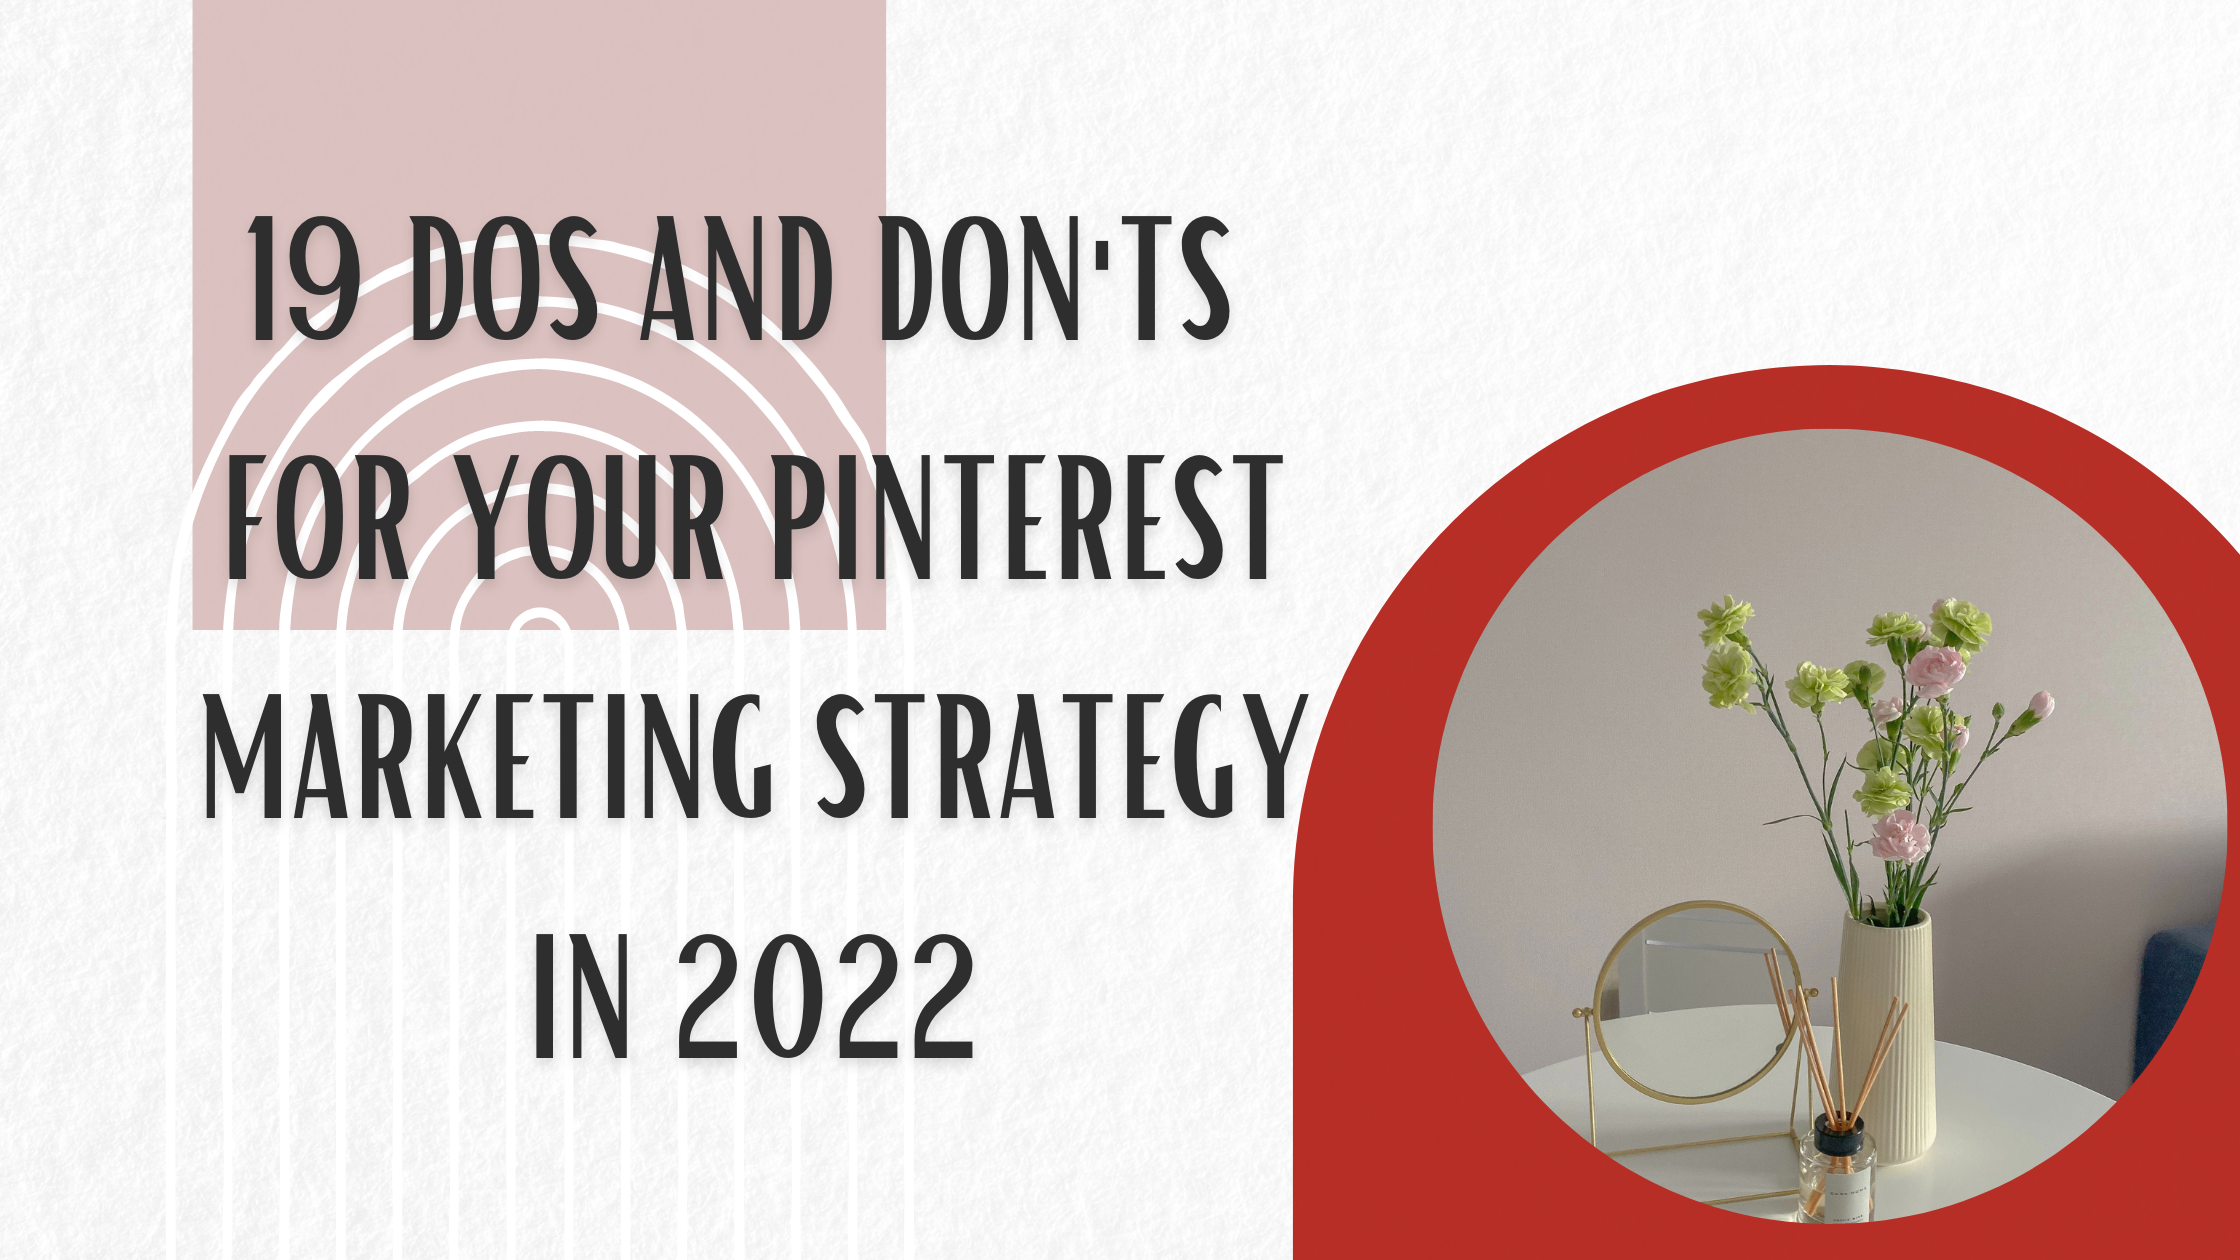 19 Dos and Don'ts for your Pinterest Marketing Strategy in 2022